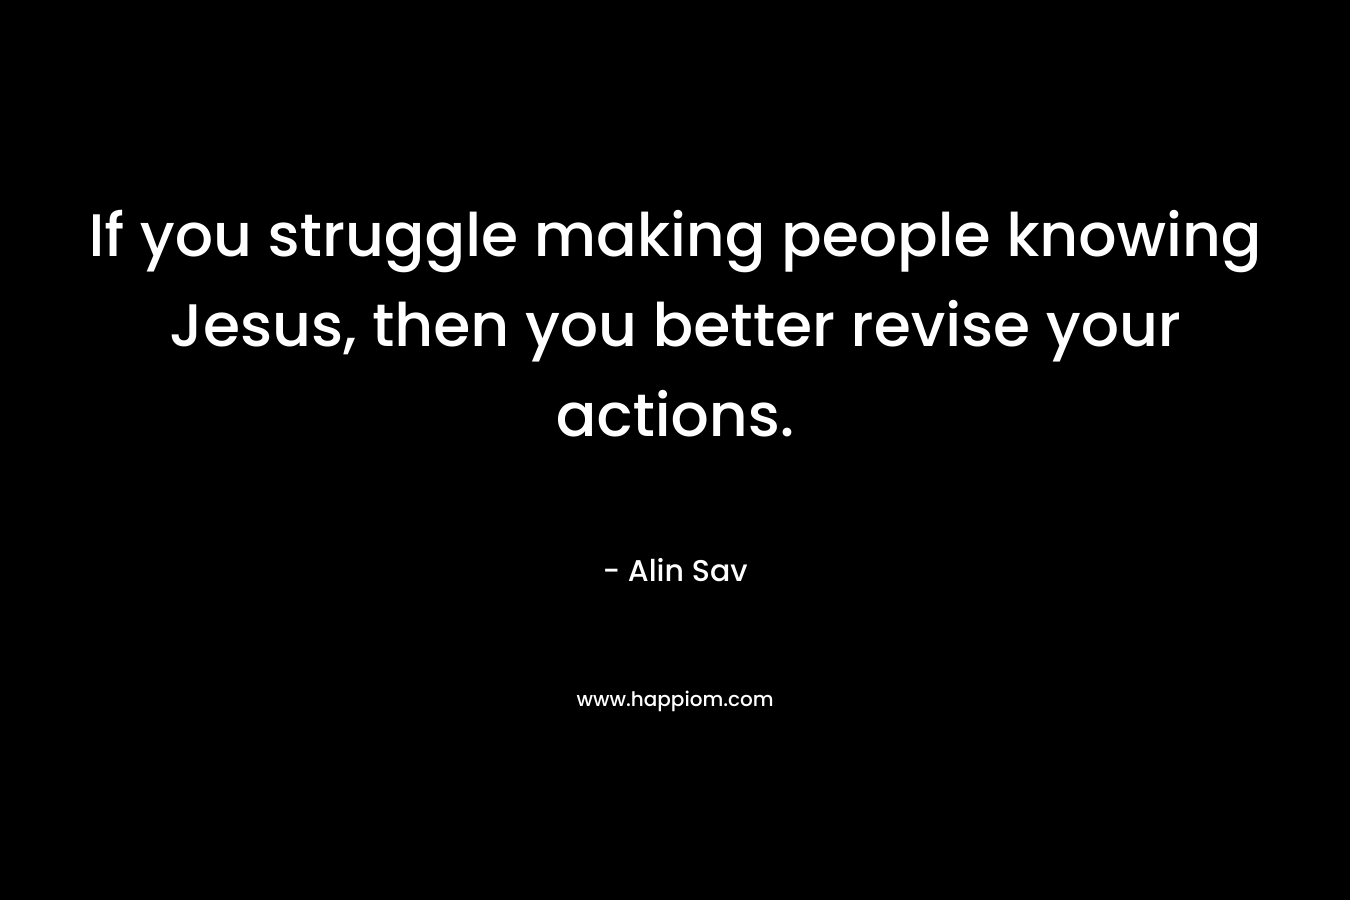 If you struggle making people knowing Jesus, then you better revise your actions.